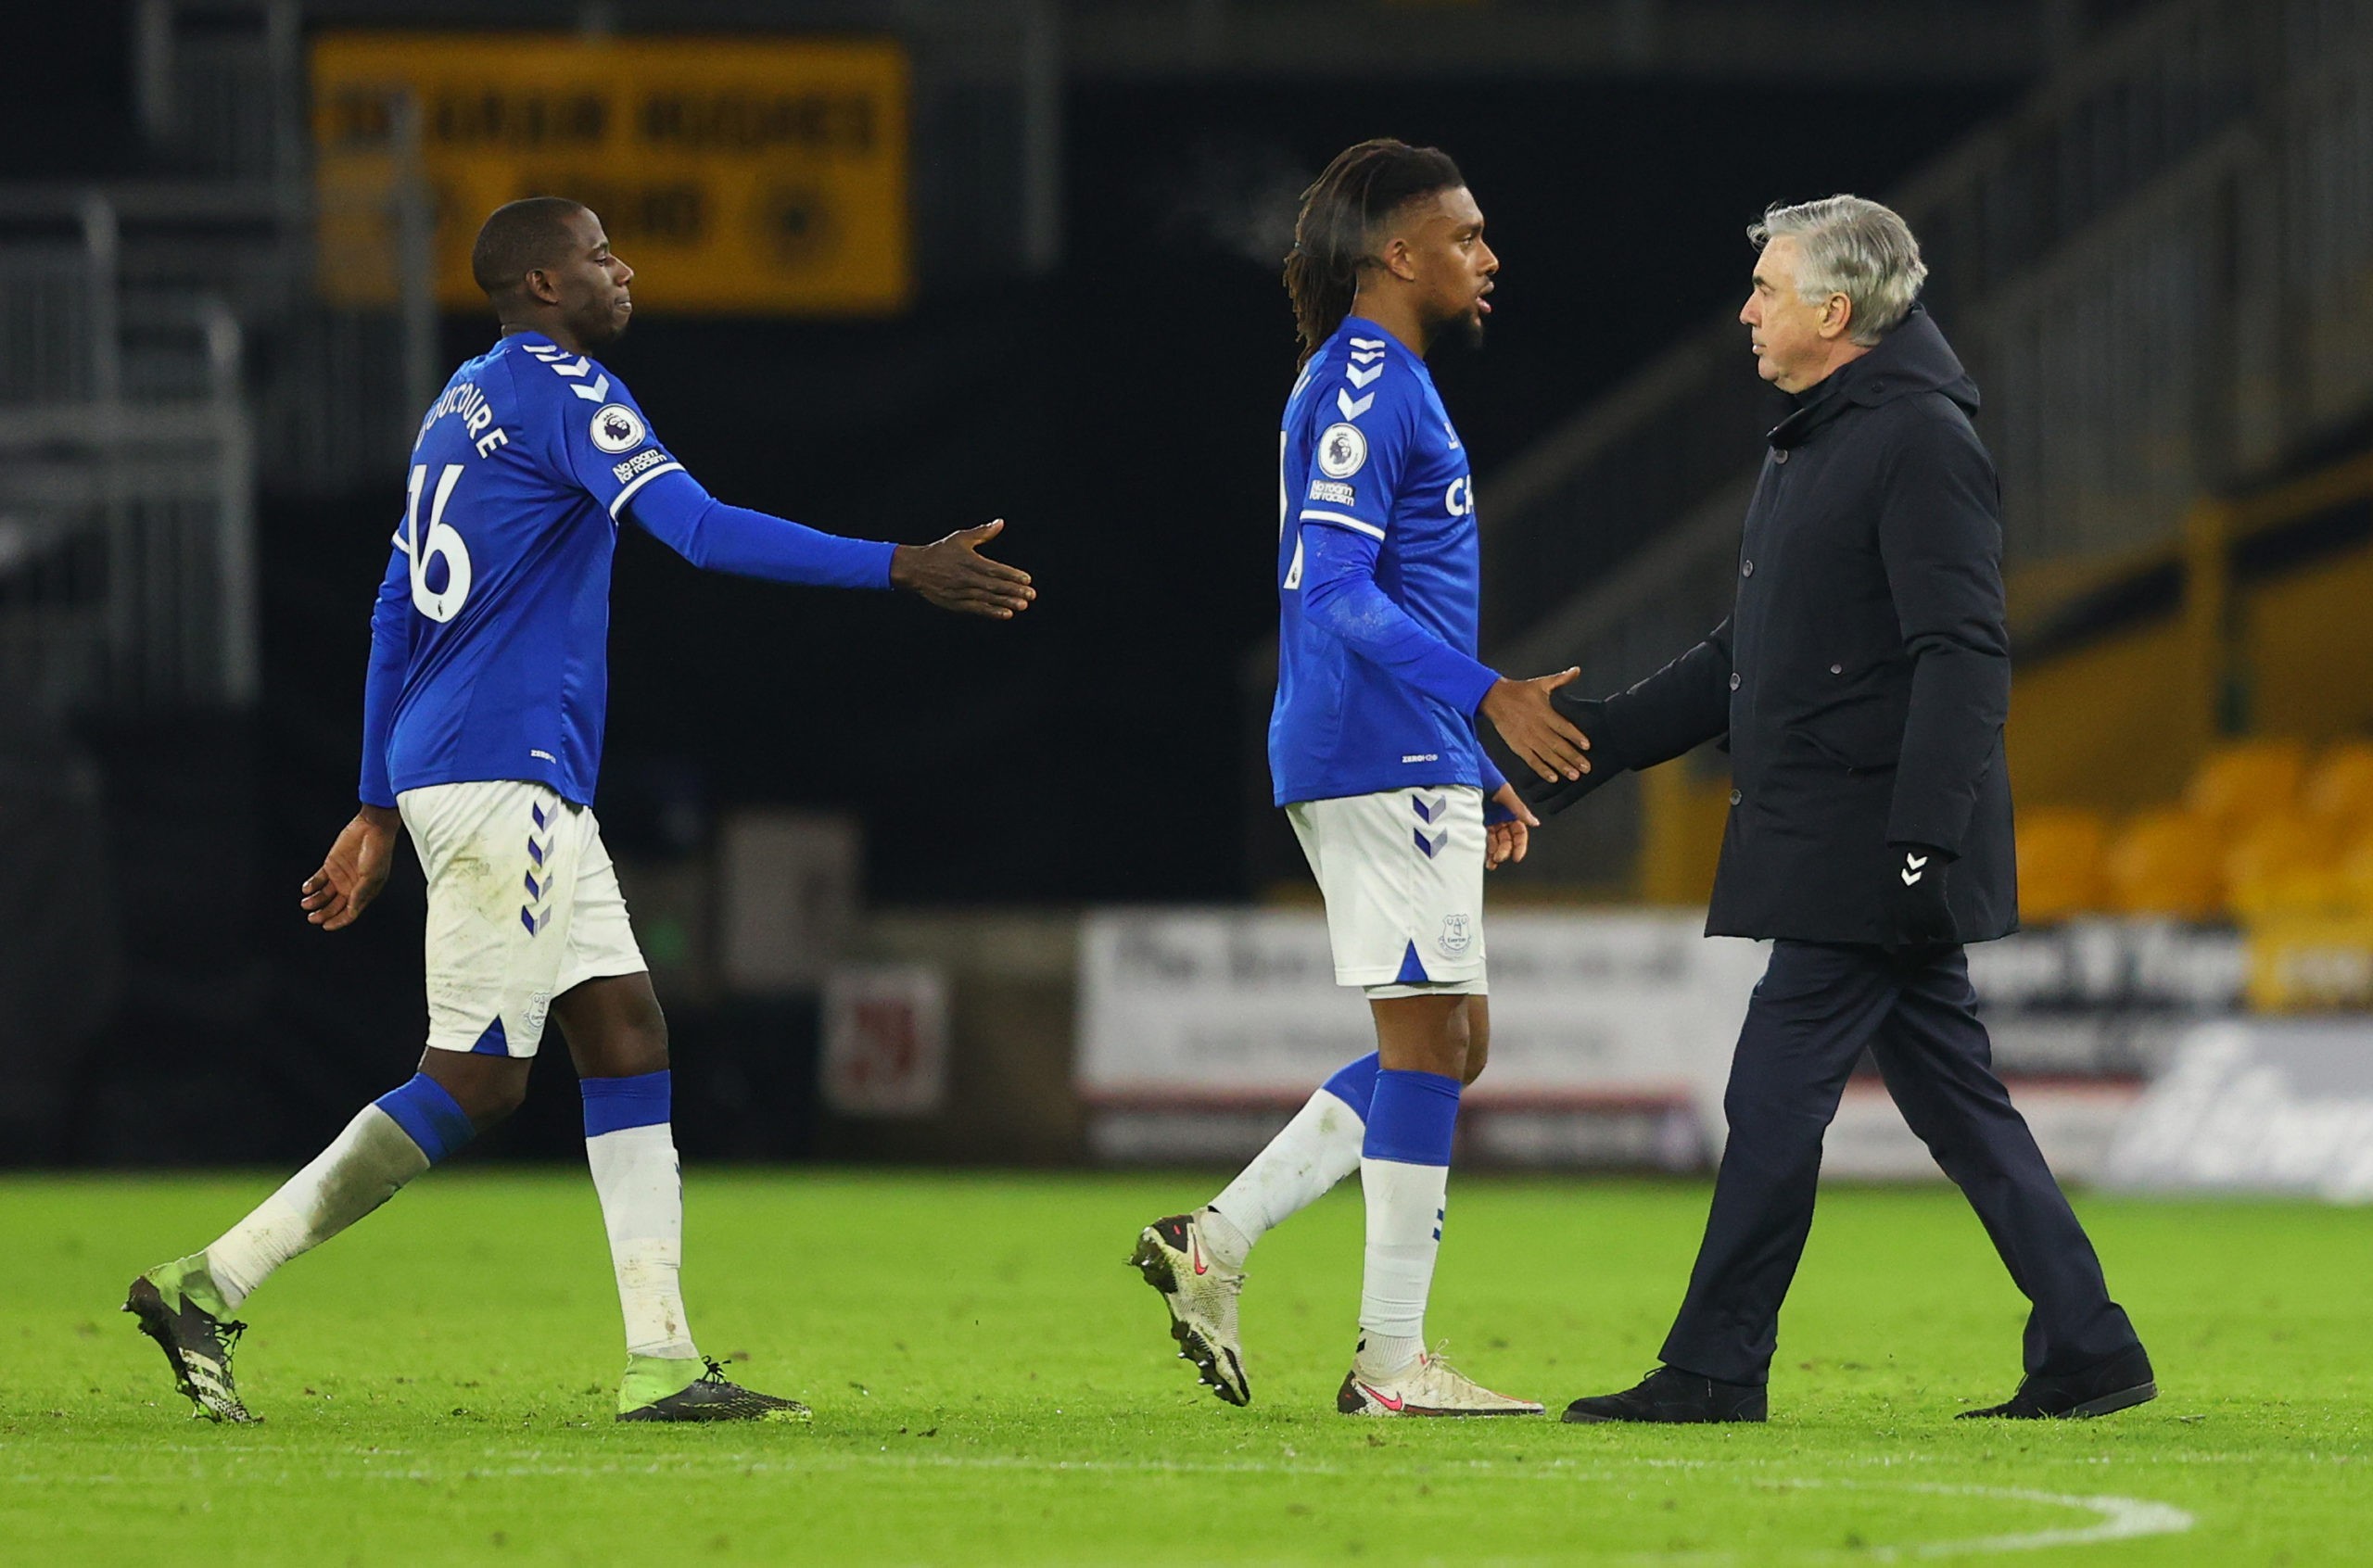 Alex Iwobi WOLVERHAMPTON, ENGLAND - JANUARY 12: Carlo Ancelotti, manager of Everton (R) shakes hands with Alex Iwobi of Everton after the Premier League match between Wolverhampton Wanderers and Everton at Molineux on January 12, 2021 in Wolverhampton, England. Sporting stadiums around England remain under strict restrictions due to the Coronavirus Pandemic as Government social distancing laws prohibit fans inside venues resulting in games being played behind closed doors. (Photo by Richard Heathcote/Getty Images)